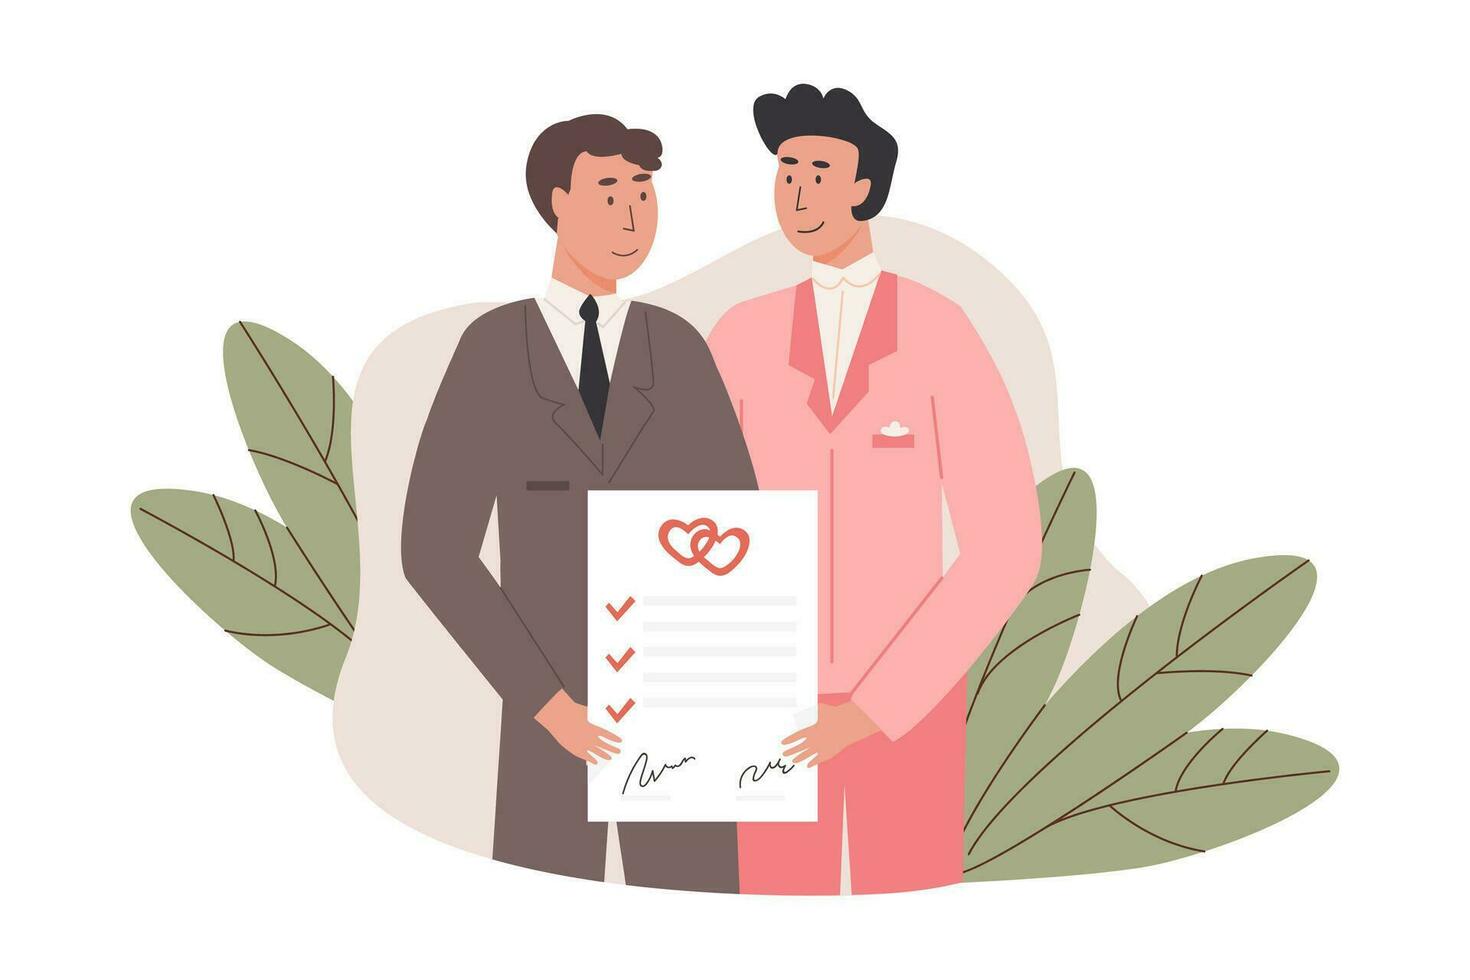 A cute male couple in suit holding signed marriage certificate. Happy married gay men with prenup document. Newlywed LGBTQ husbands. Romantic same sex marriage of love partners. Vector illustration.